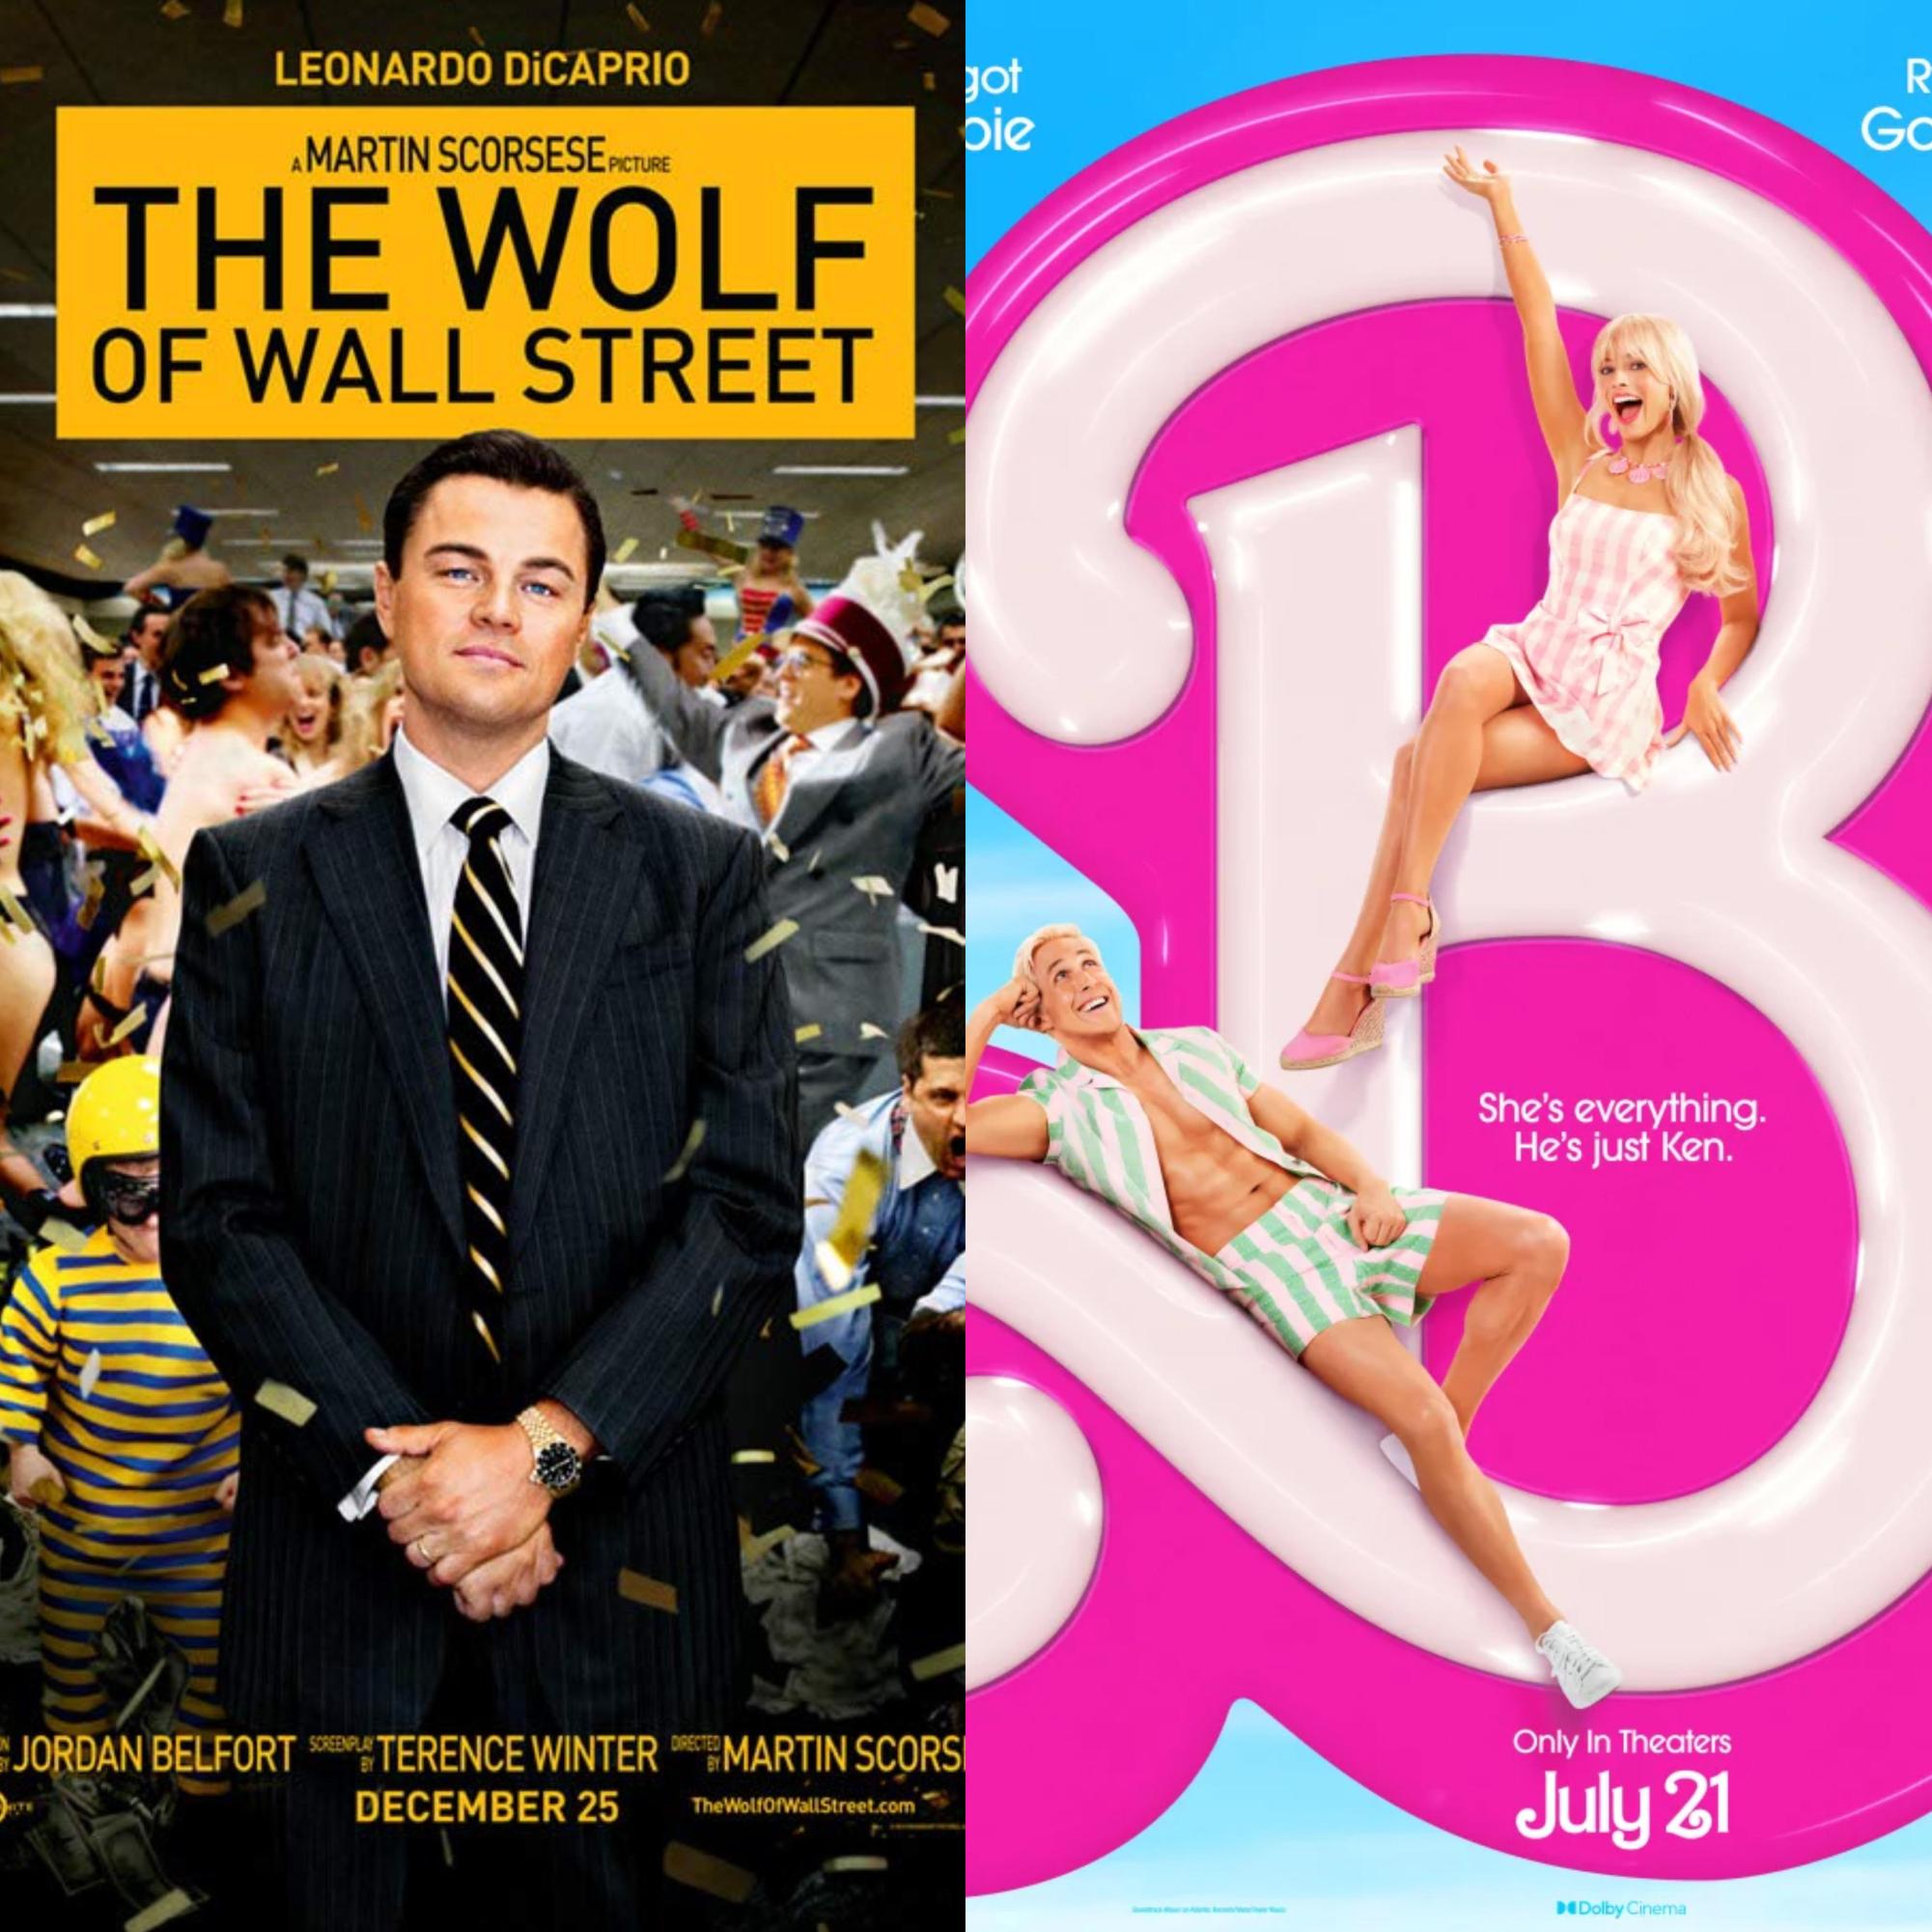 The Wolf of Wall Street': The polarizing reviews are in